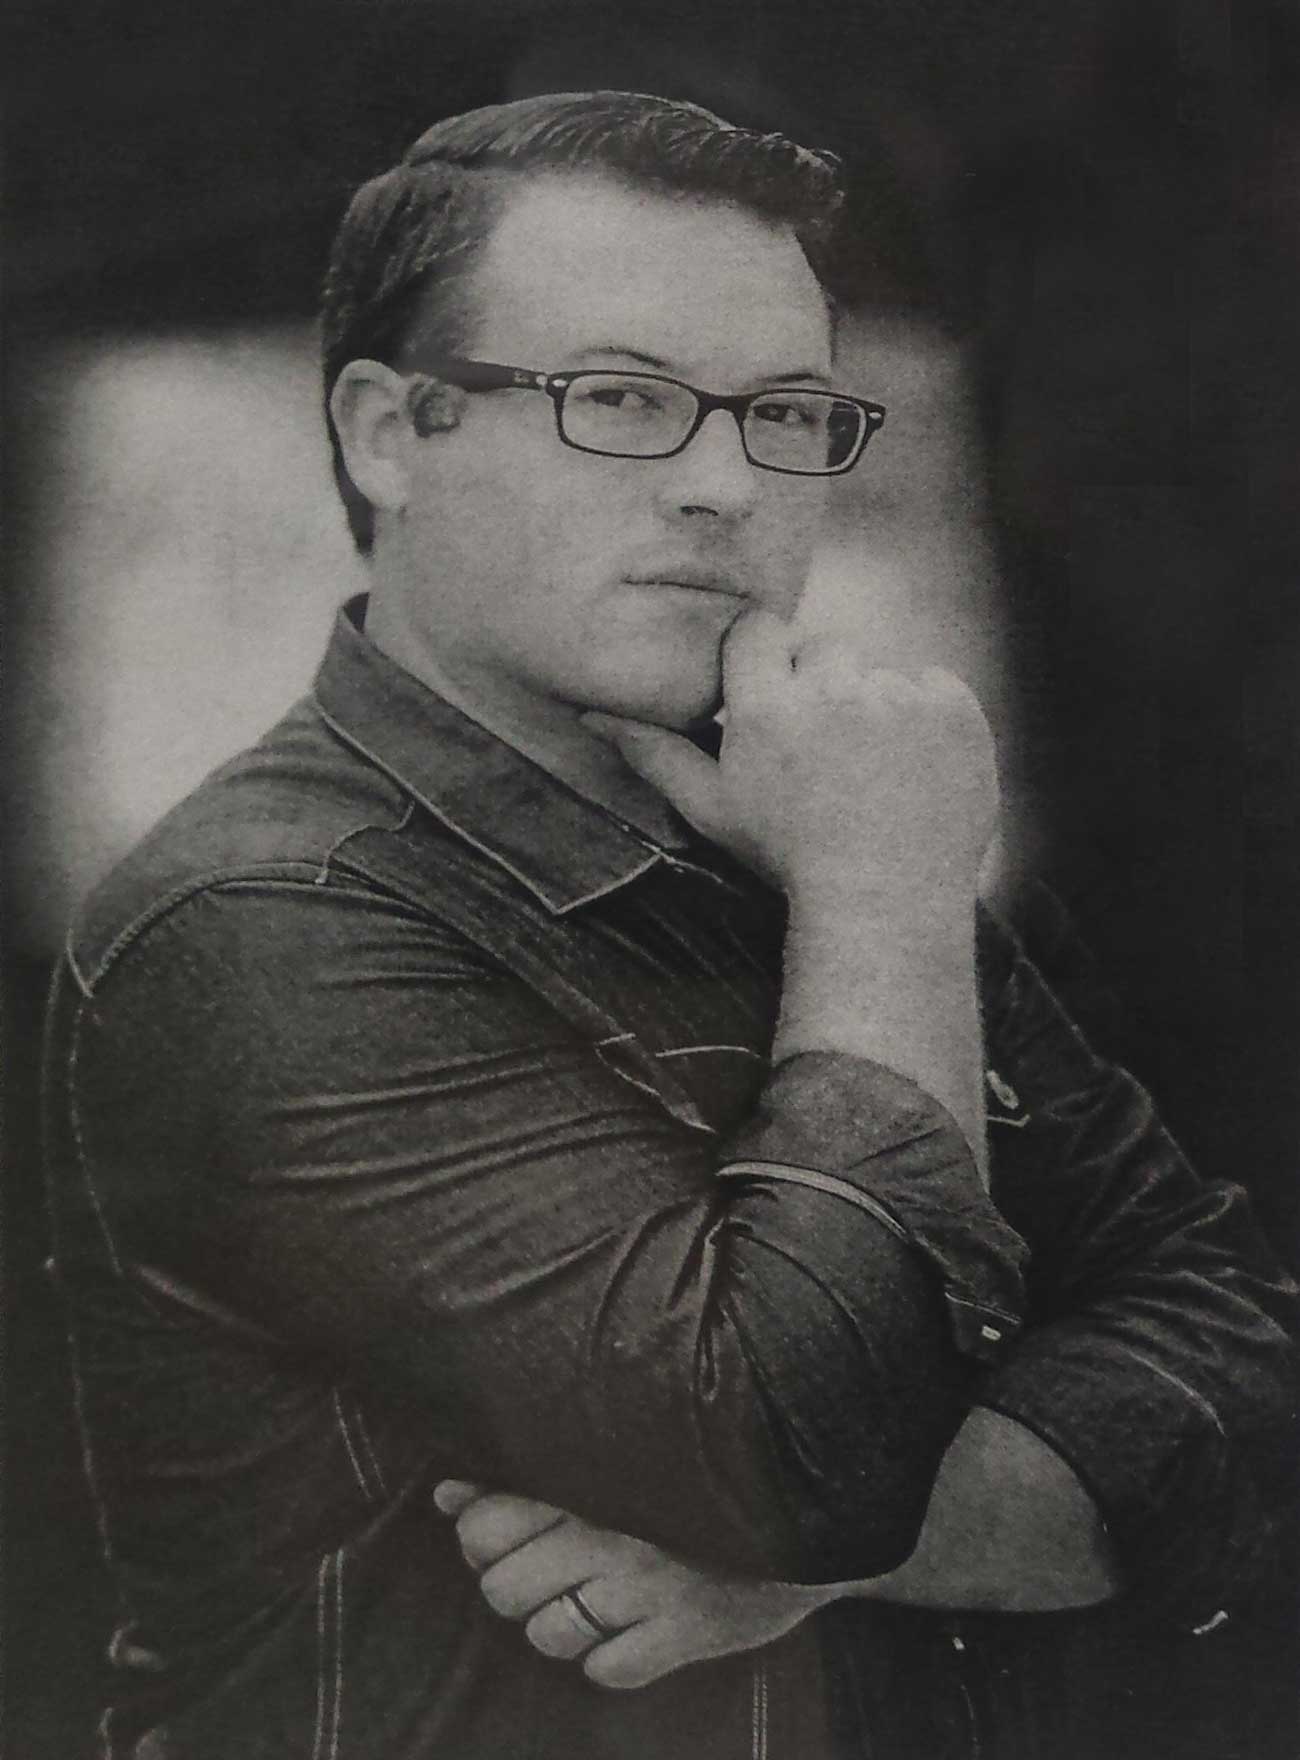 Black and White photo of the artist